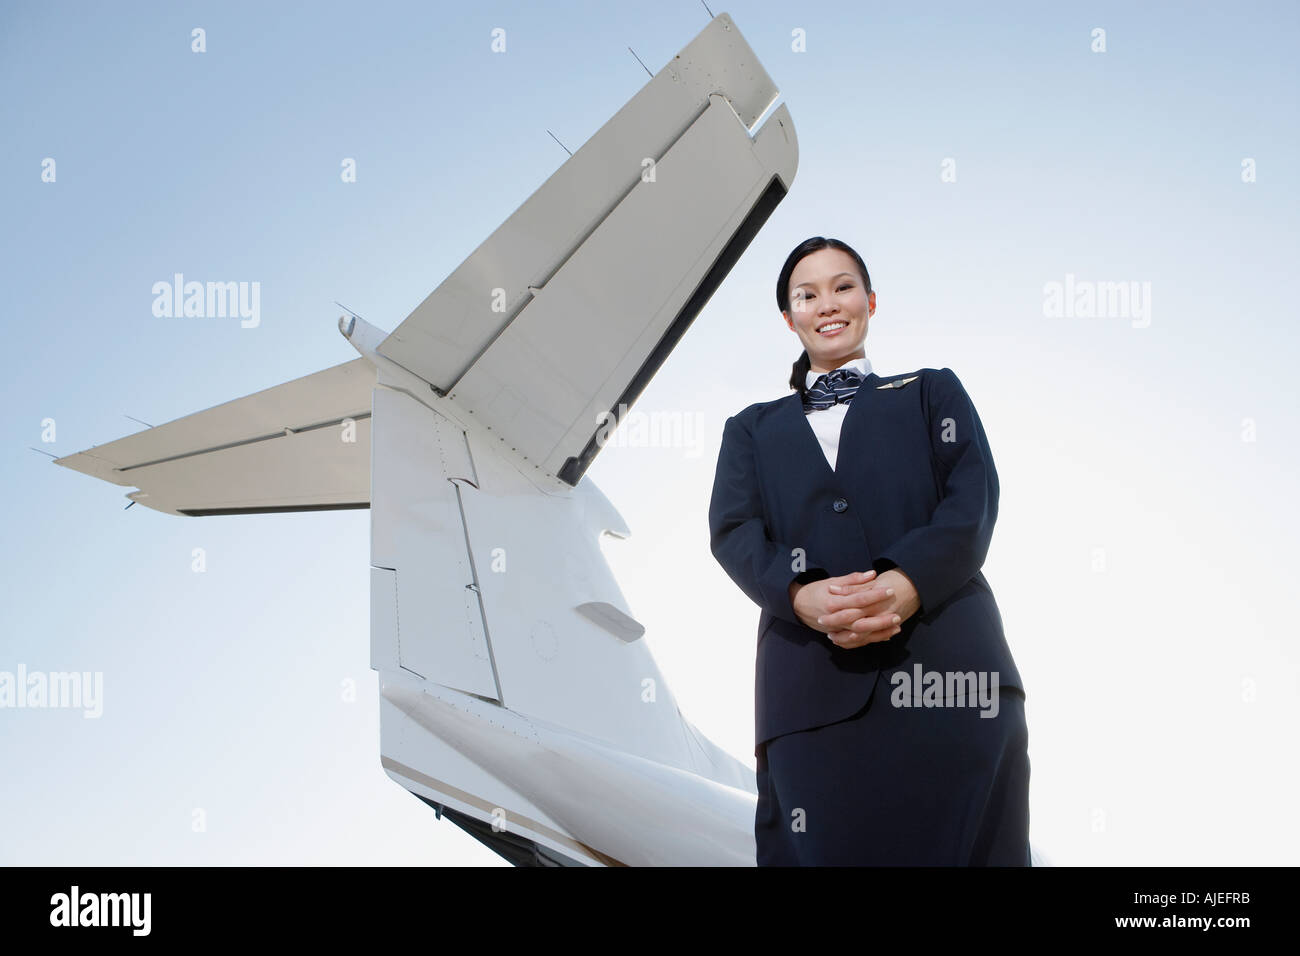 Stewardess in uniform, standing below wing of private jet, low angle view Stock Photo